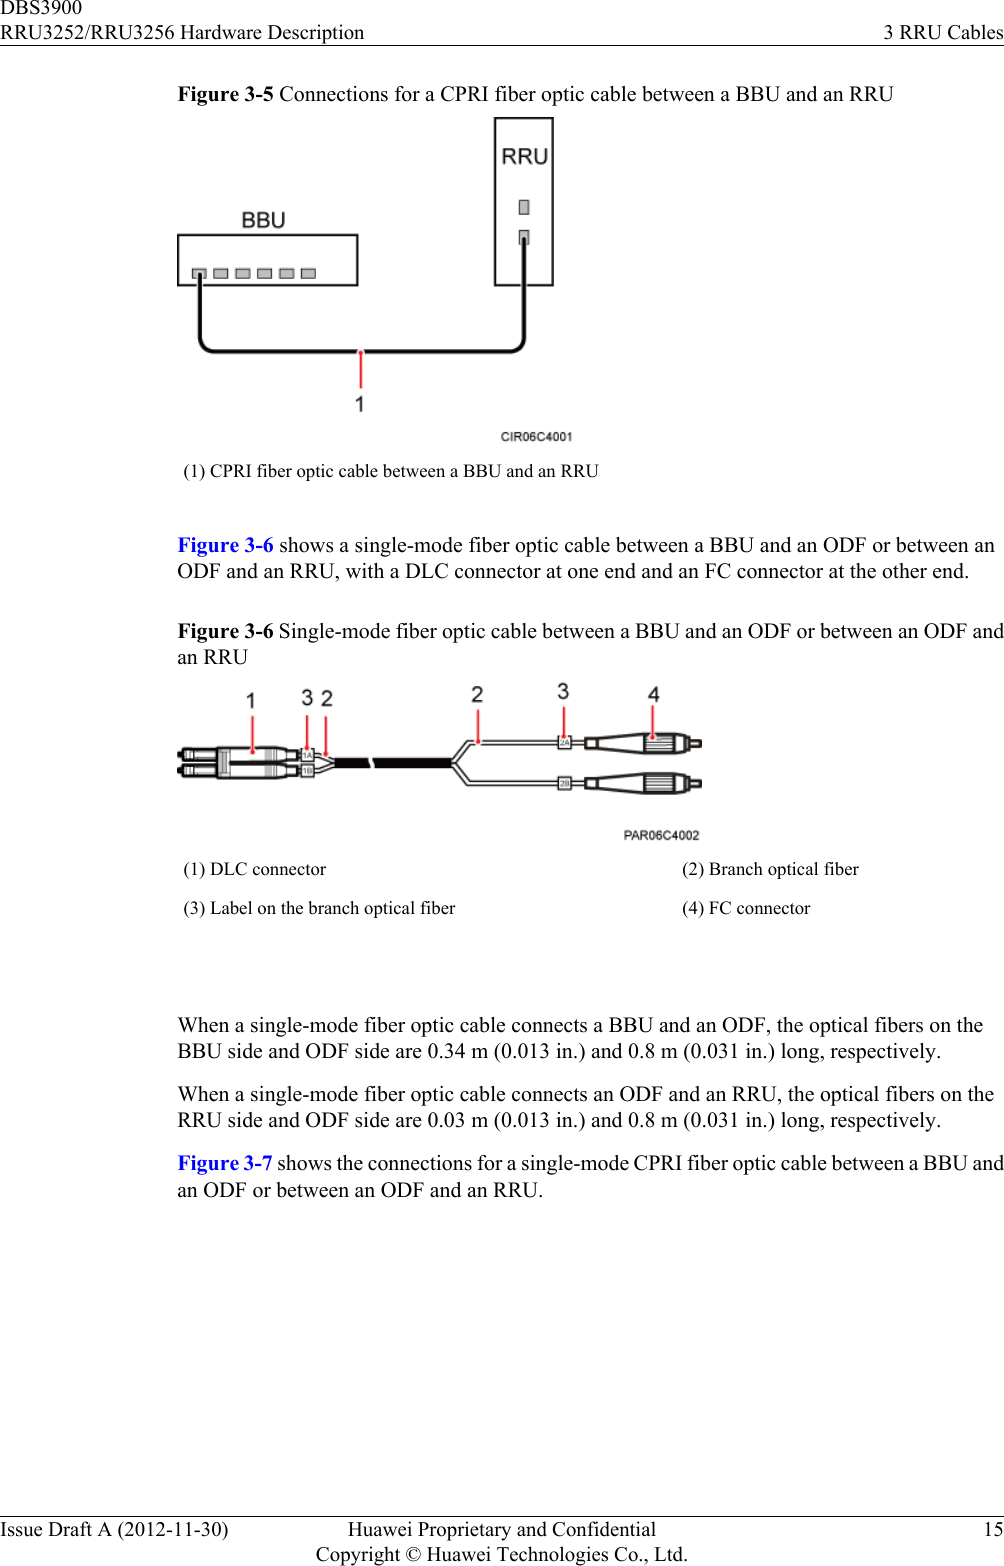 Figure 3-5 Connections for a CPRI fiber optic cable between a BBU and an RRU(1) CPRI fiber optic cable between a BBU and an RRUFigure 3-6 shows a single-mode fiber optic cable between a BBU and an ODF or between anODF and an RRU, with a DLC connector at one end and an FC connector at the other end.Figure 3-6 Single-mode fiber optic cable between a BBU and an ODF or between an ODF andan RRU(1) DLC connector (2) Branch optical fiber(3) Label on the branch optical fiber (4) FC connector When a single-mode fiber optic cable connects a BBU and an ODF, the optical fibers on theBBU side and ODF side are 0.34 m (0.013 in.) and 0.8 m (0.031 in.) long, respectively.When a single-mode fiber optic cable connects an ODF and an RRU, the optical fibers on theRRU side and ODF side are 0.03 m (0.013 in.) and 0.8 m (0.031 in.) long, respectively.Figure 3-7 shows the connections for a single-mode CPRI fiber optic cable between a BBU andan ODF or between an ODF and an RRU.DBS3900RRU3252/RRU3256 Hardware Description 3 RRU CablesIssue Draft A (2012-11-30) Huawei Proprietary and ConfidentialCopyright © Huawei Technologies Co., Ltd.15